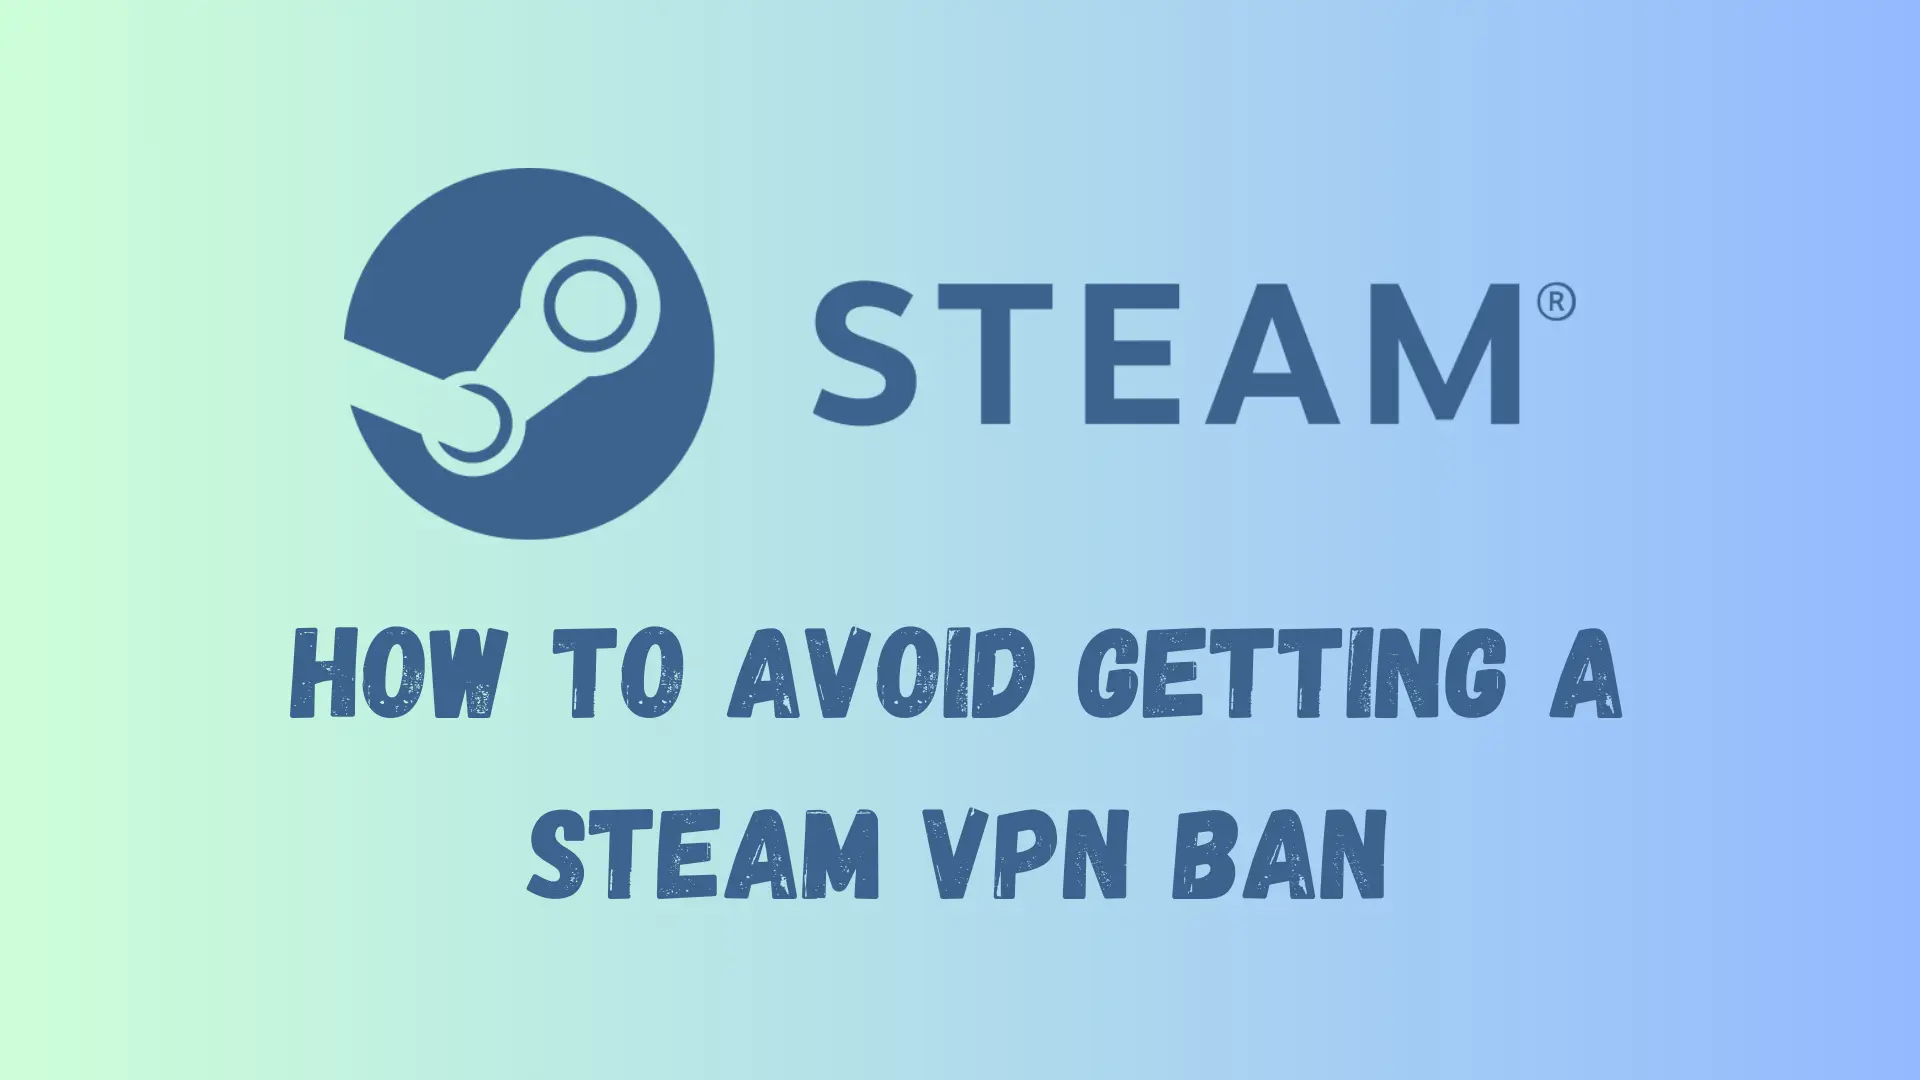 Steam VPN Ban – How to Avoid It